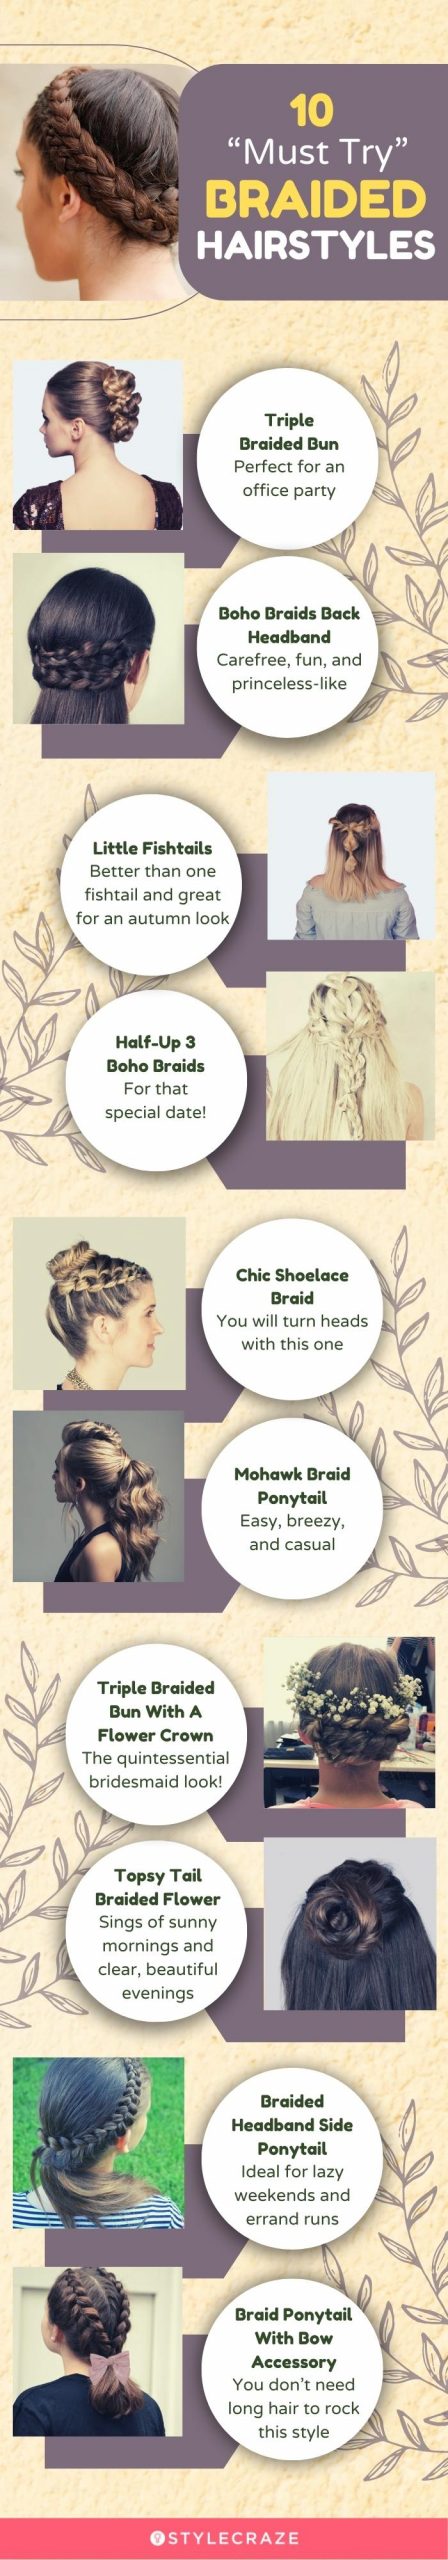 10 must try braided hairstyles (infographic)